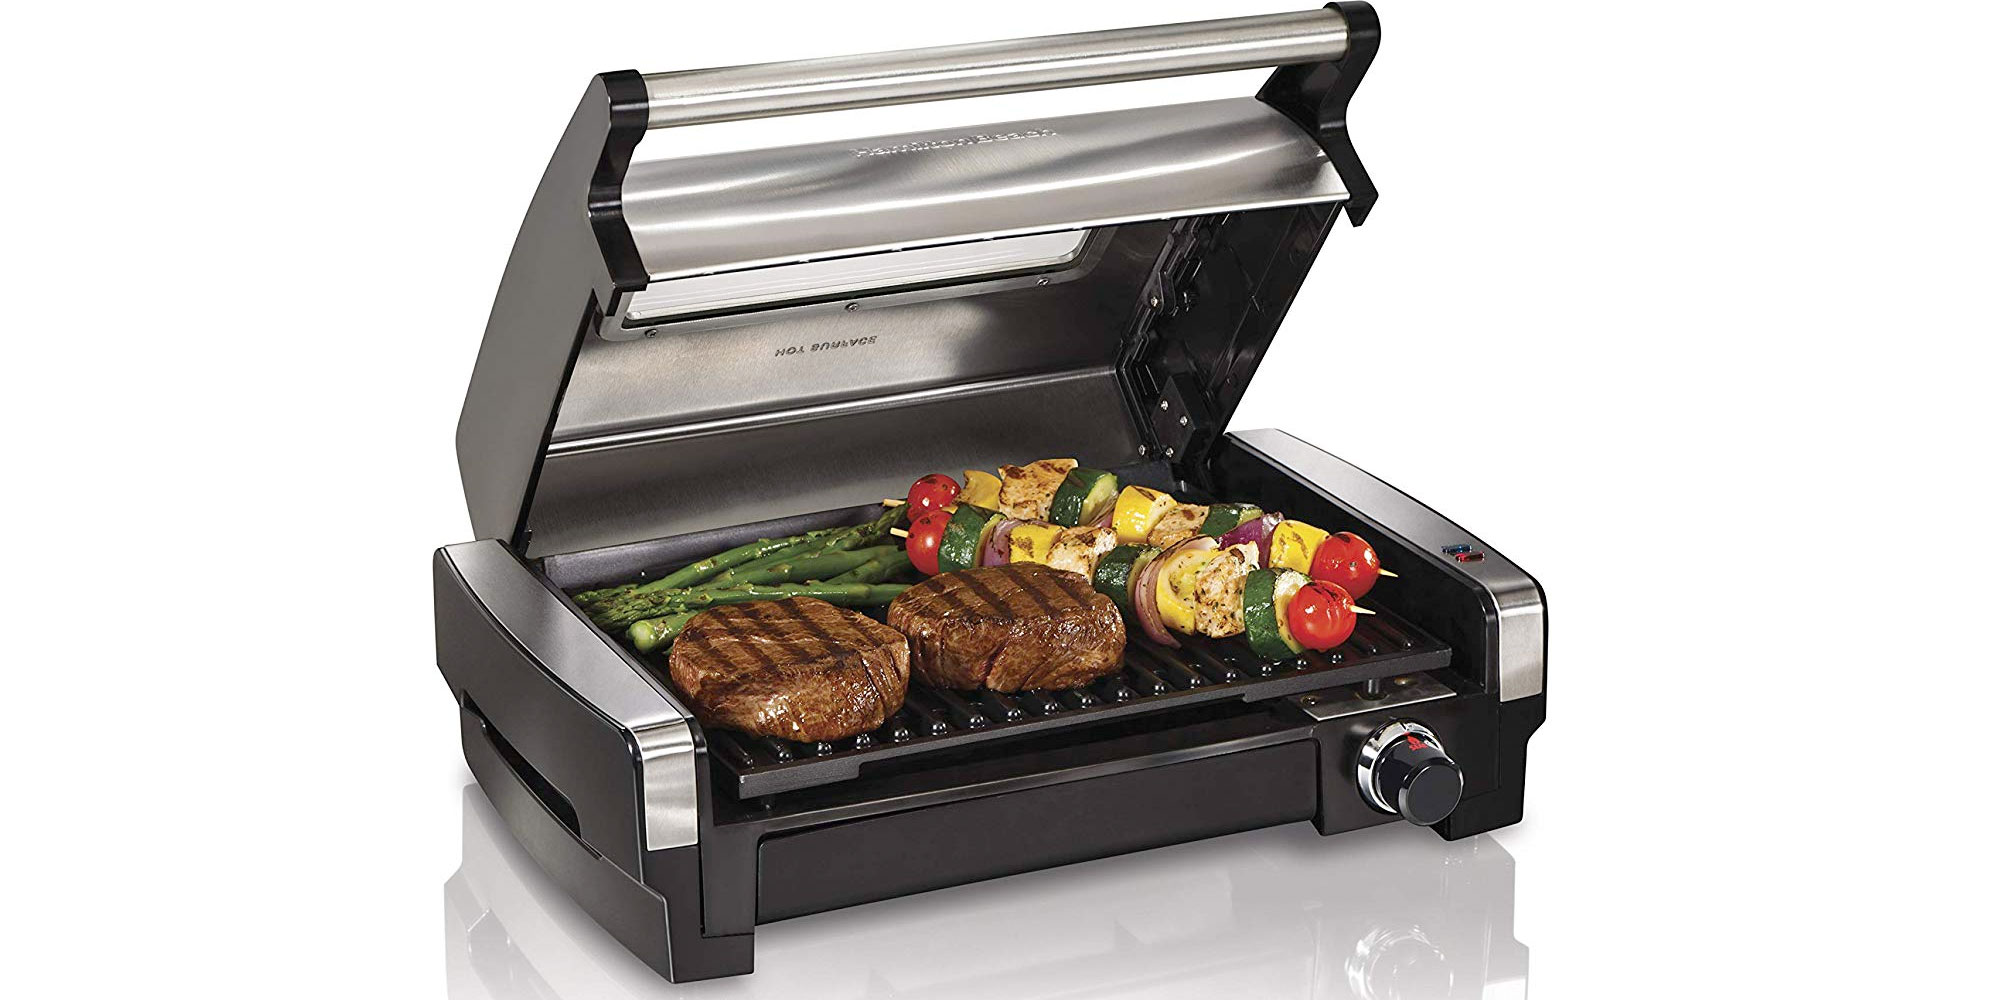 https://9to5toys.com/wp-content/uploads/sites/5/2019/07/Hamilton-Beach-Indoor-Searing-Grill-25361.jpg